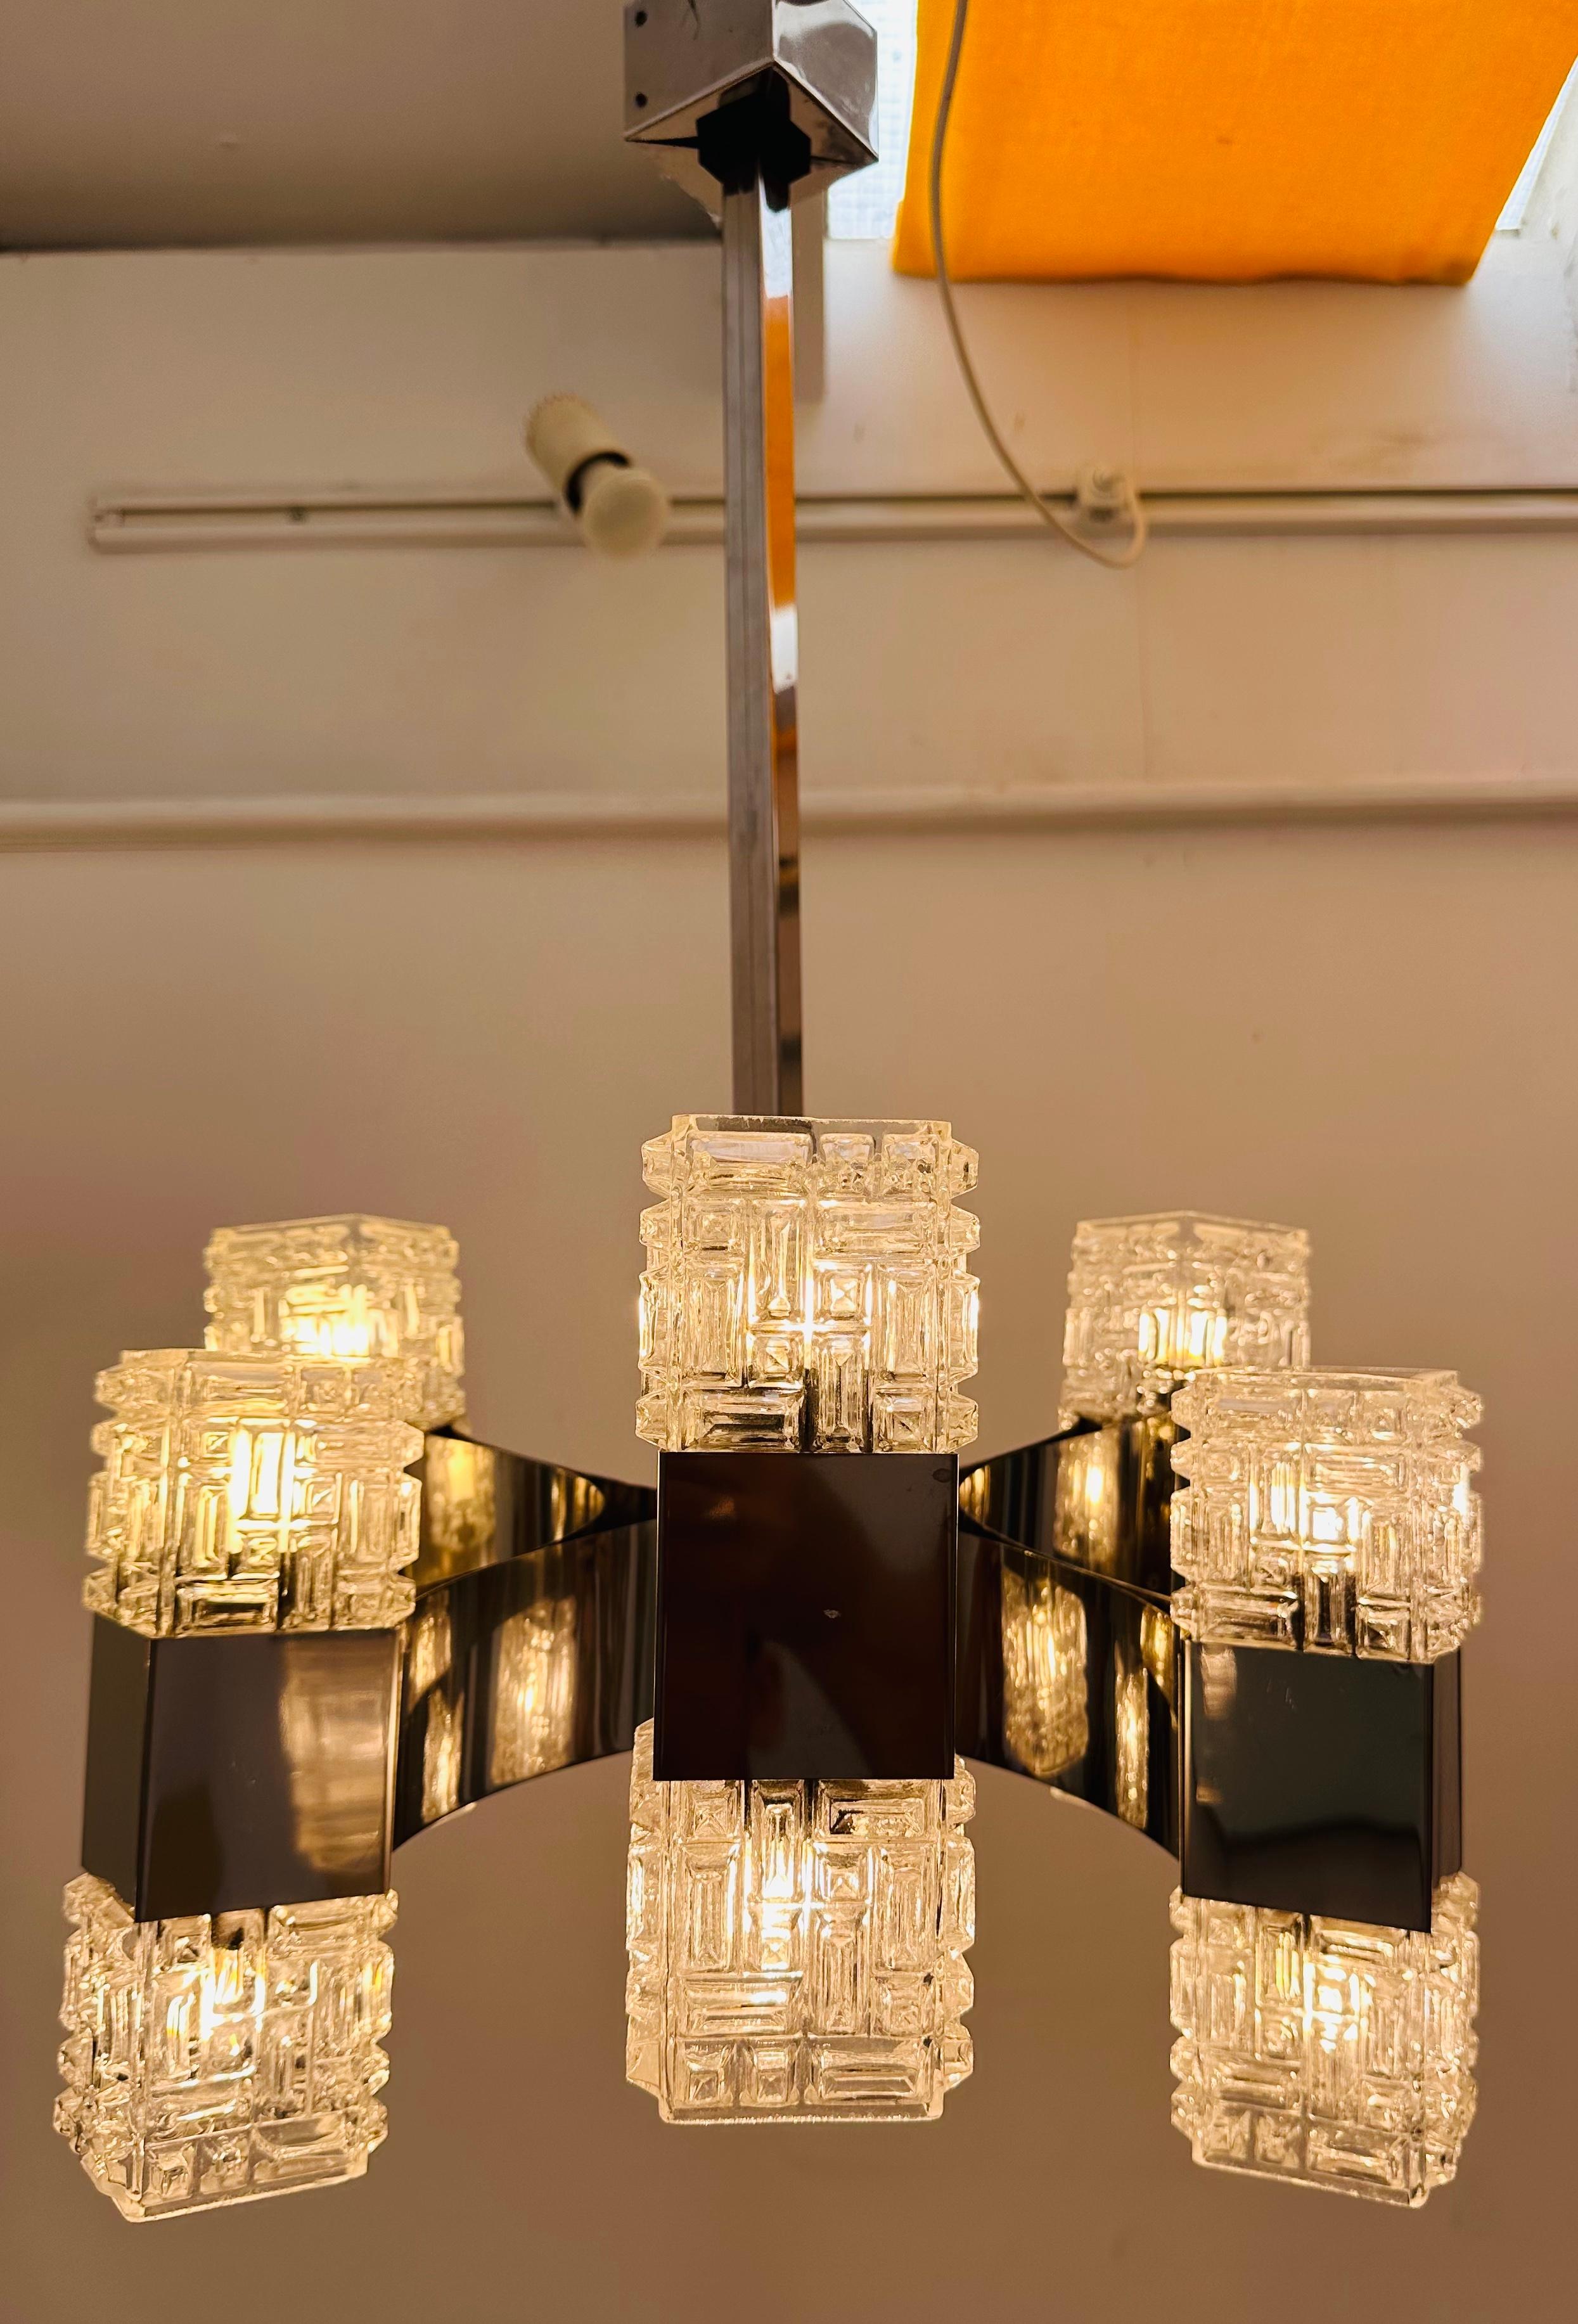 1960s Italian pendant chandelier ceiling light with twelve square cubist shades - six that face upwards and six downwards. Designed by Gaetano Sciolari for Sciolari Lighting.  The glass shades are supported on a polished chrome-plated steel frame